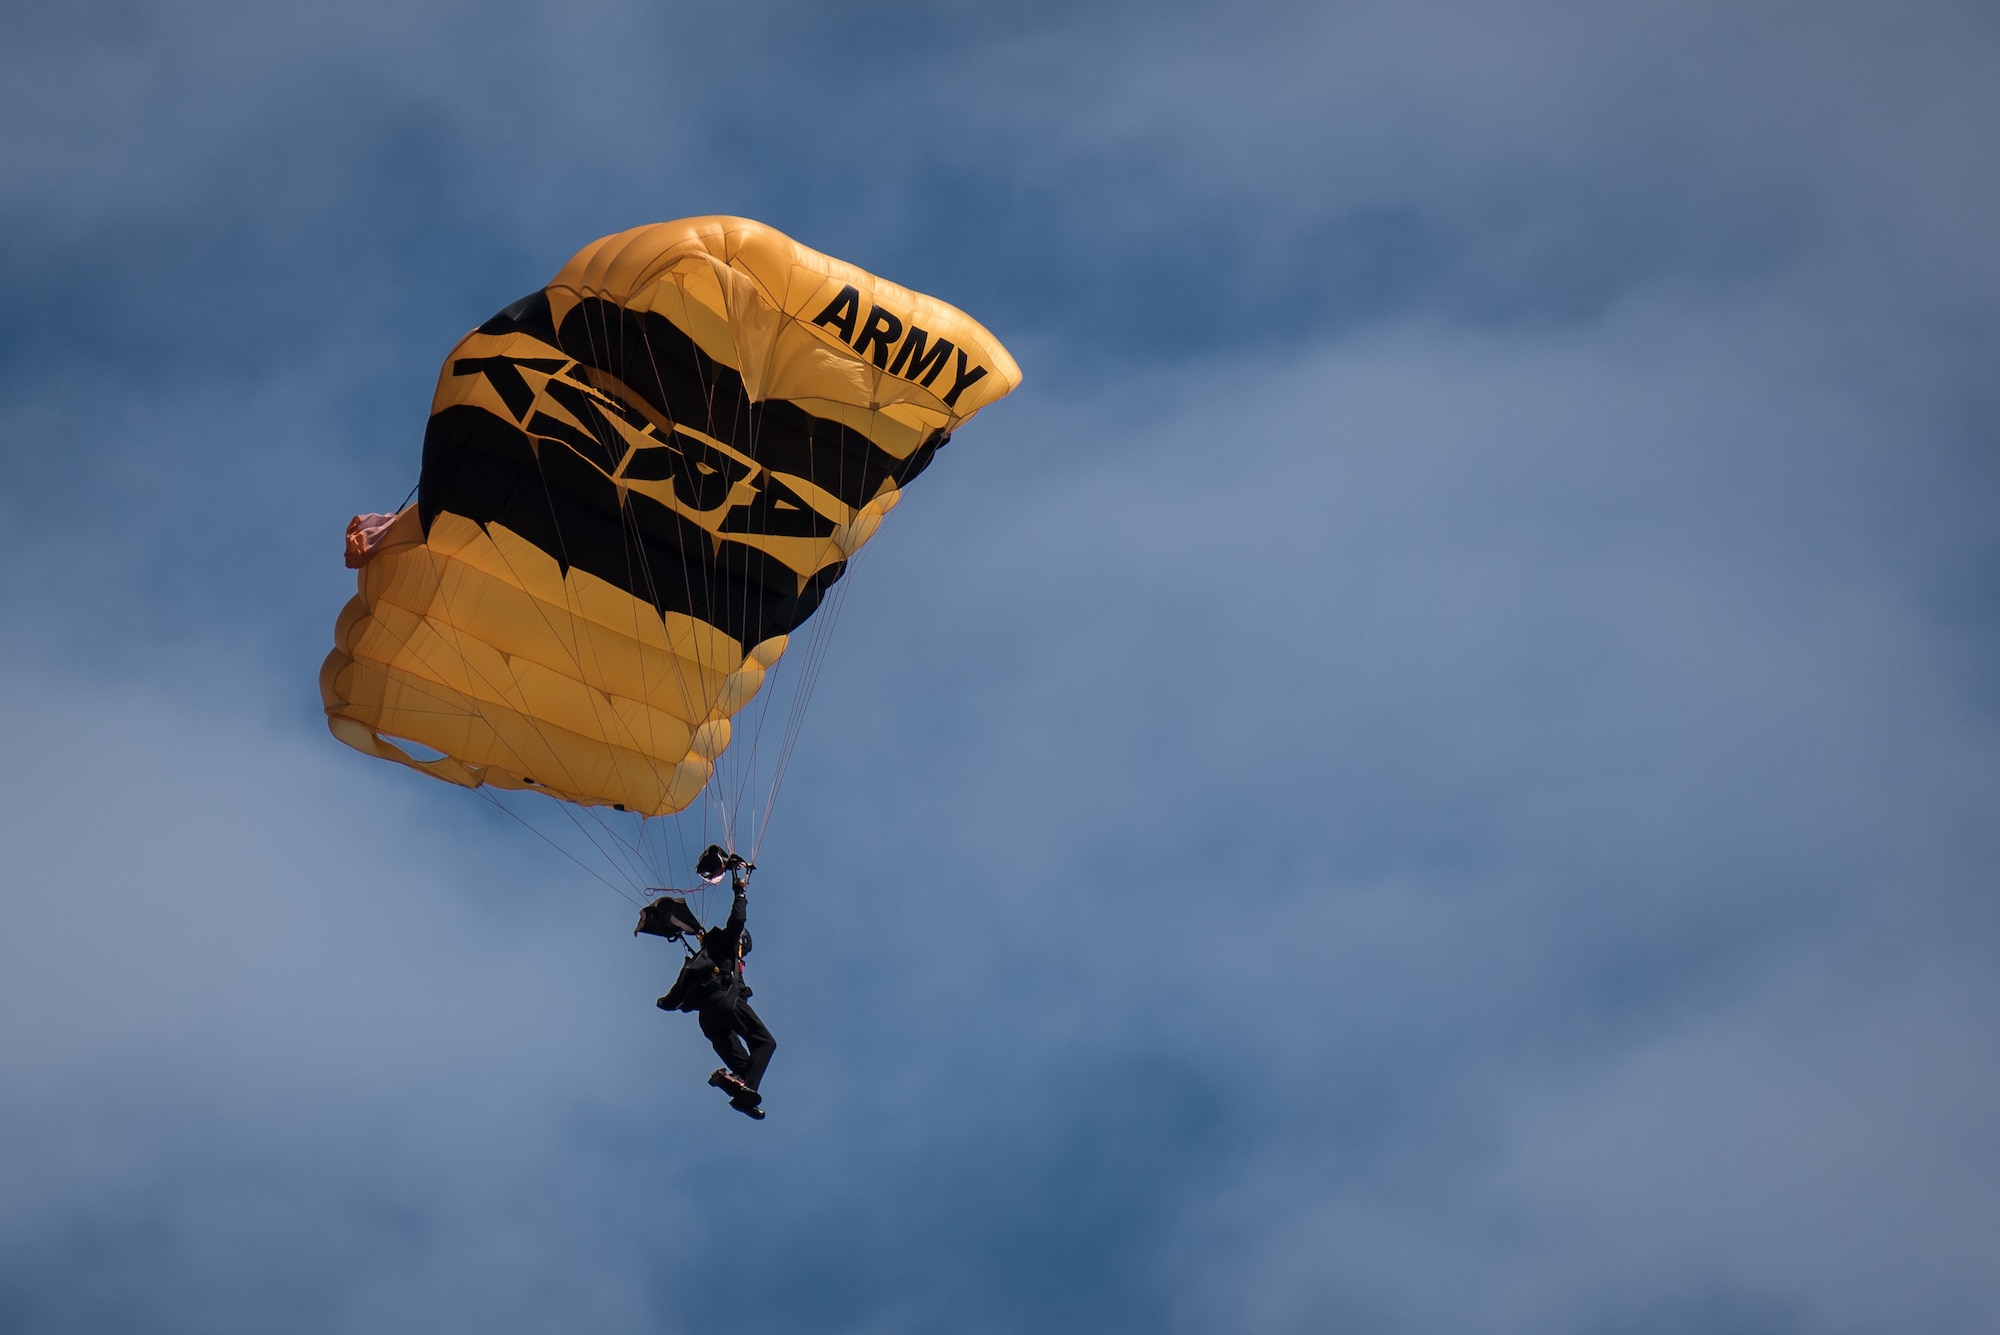 A soldier from the U.S. Army’s Golden Knights parachute demonstration team descends into downtown Louisville April 13, 2019, during the annual Thunder Over Louisville air show. Hundreds of thousands of spectators turned out to view the event, which has grown to become one of the largest single-day air shows in North America. (U.S. Air National Guard photo by Dale Greer)